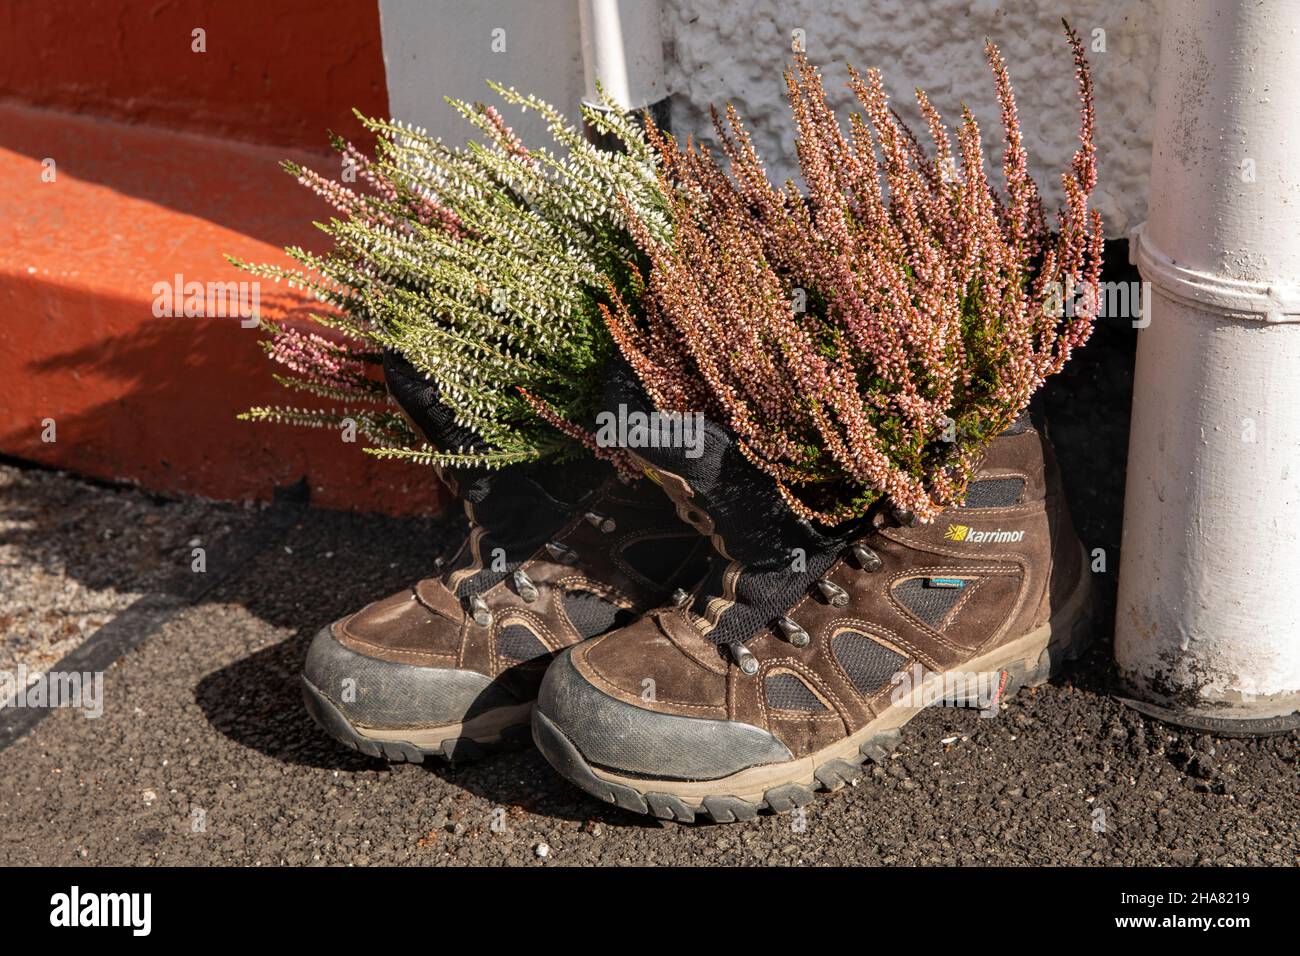 UK, Cumbria, Allerdale, Keswick, The Seams, old walking shoes planted with heather plants on doorstep Stock Photo